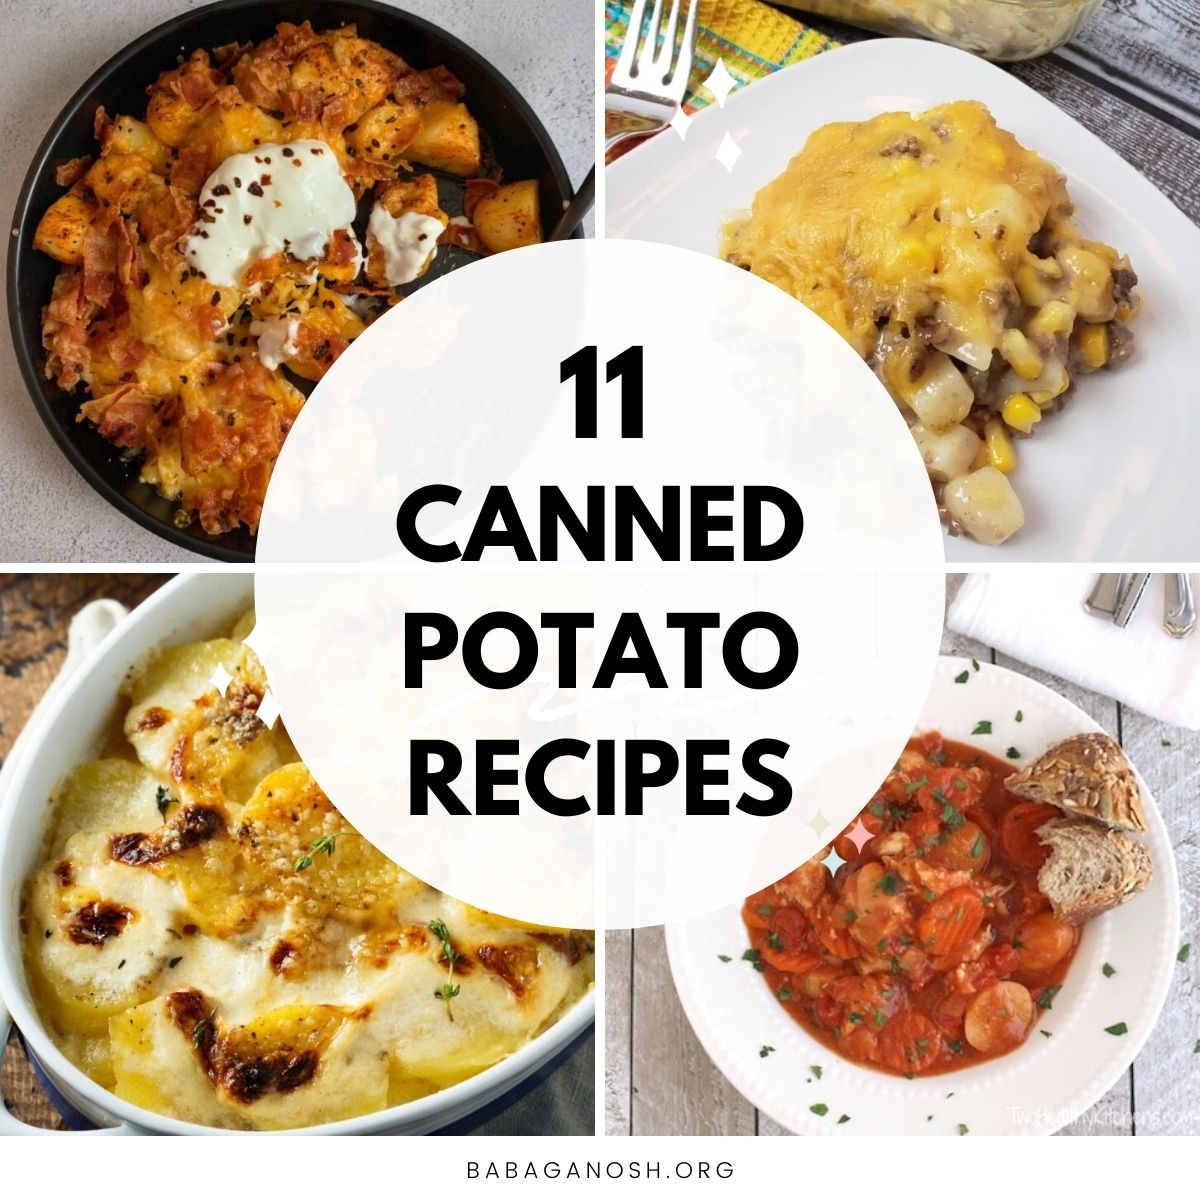 Graphic with text: 11 Canned Potato Recipes